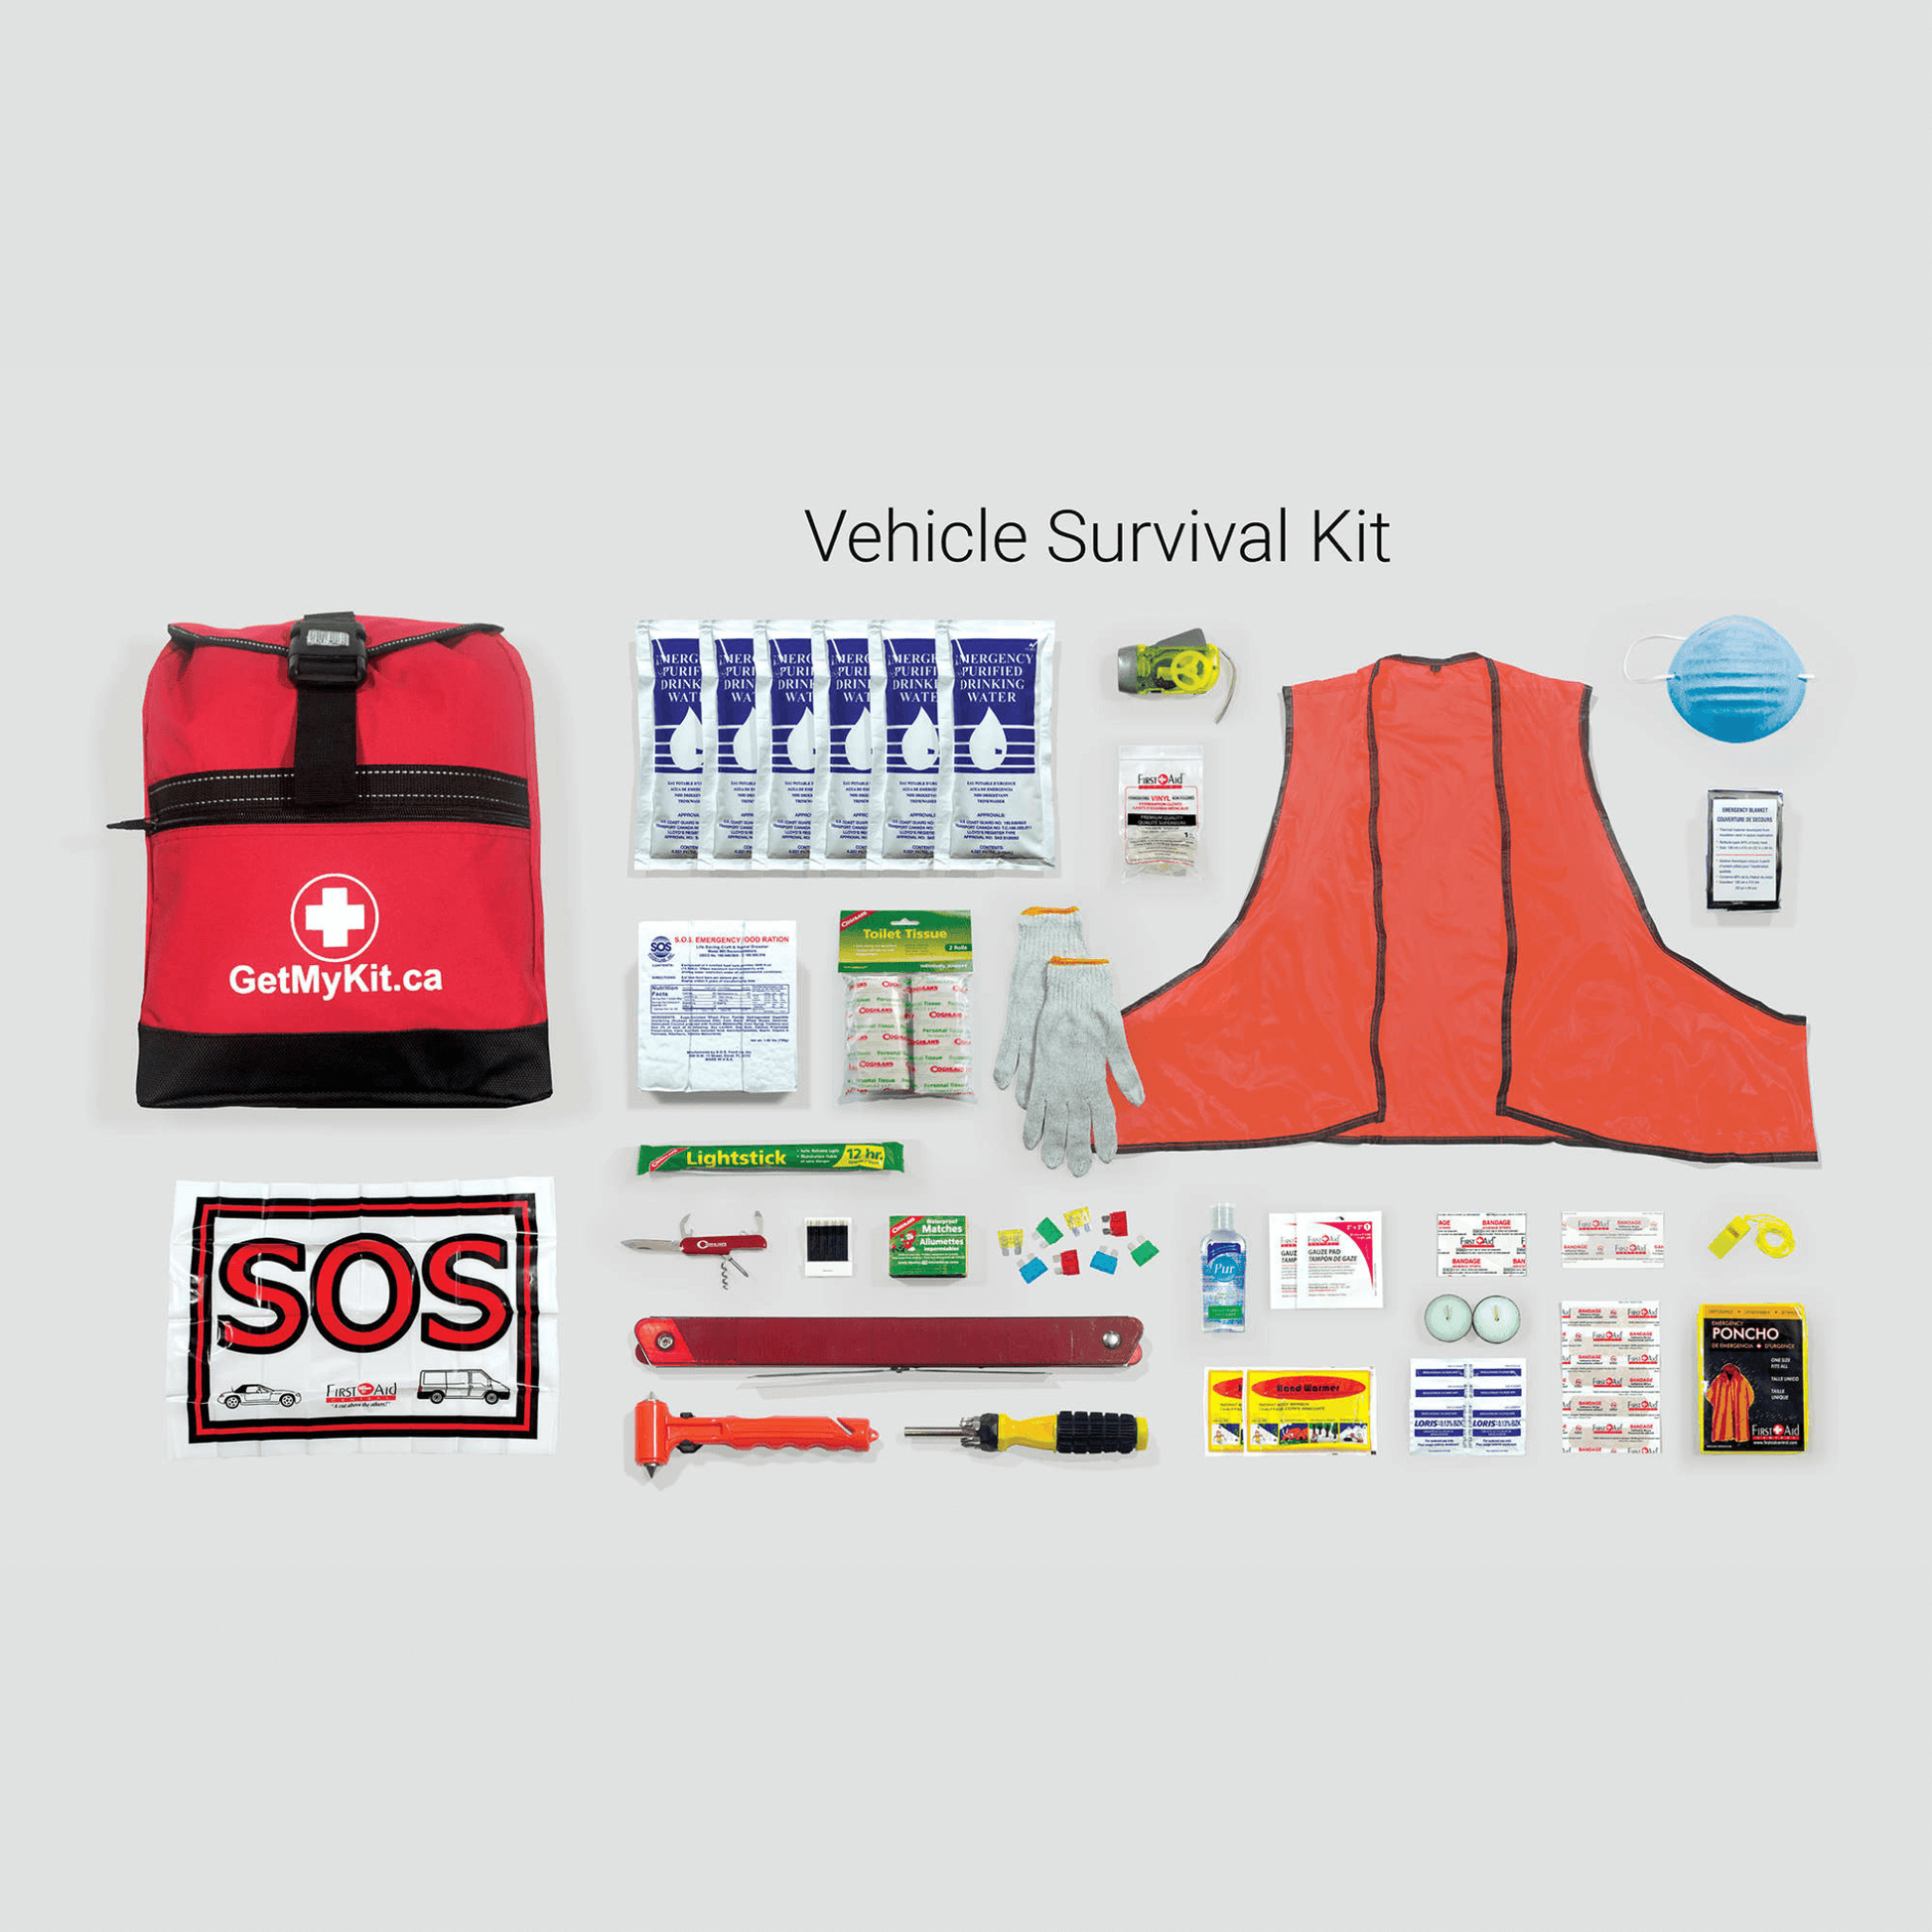 Emergency preparedness supplies for your vehicle.